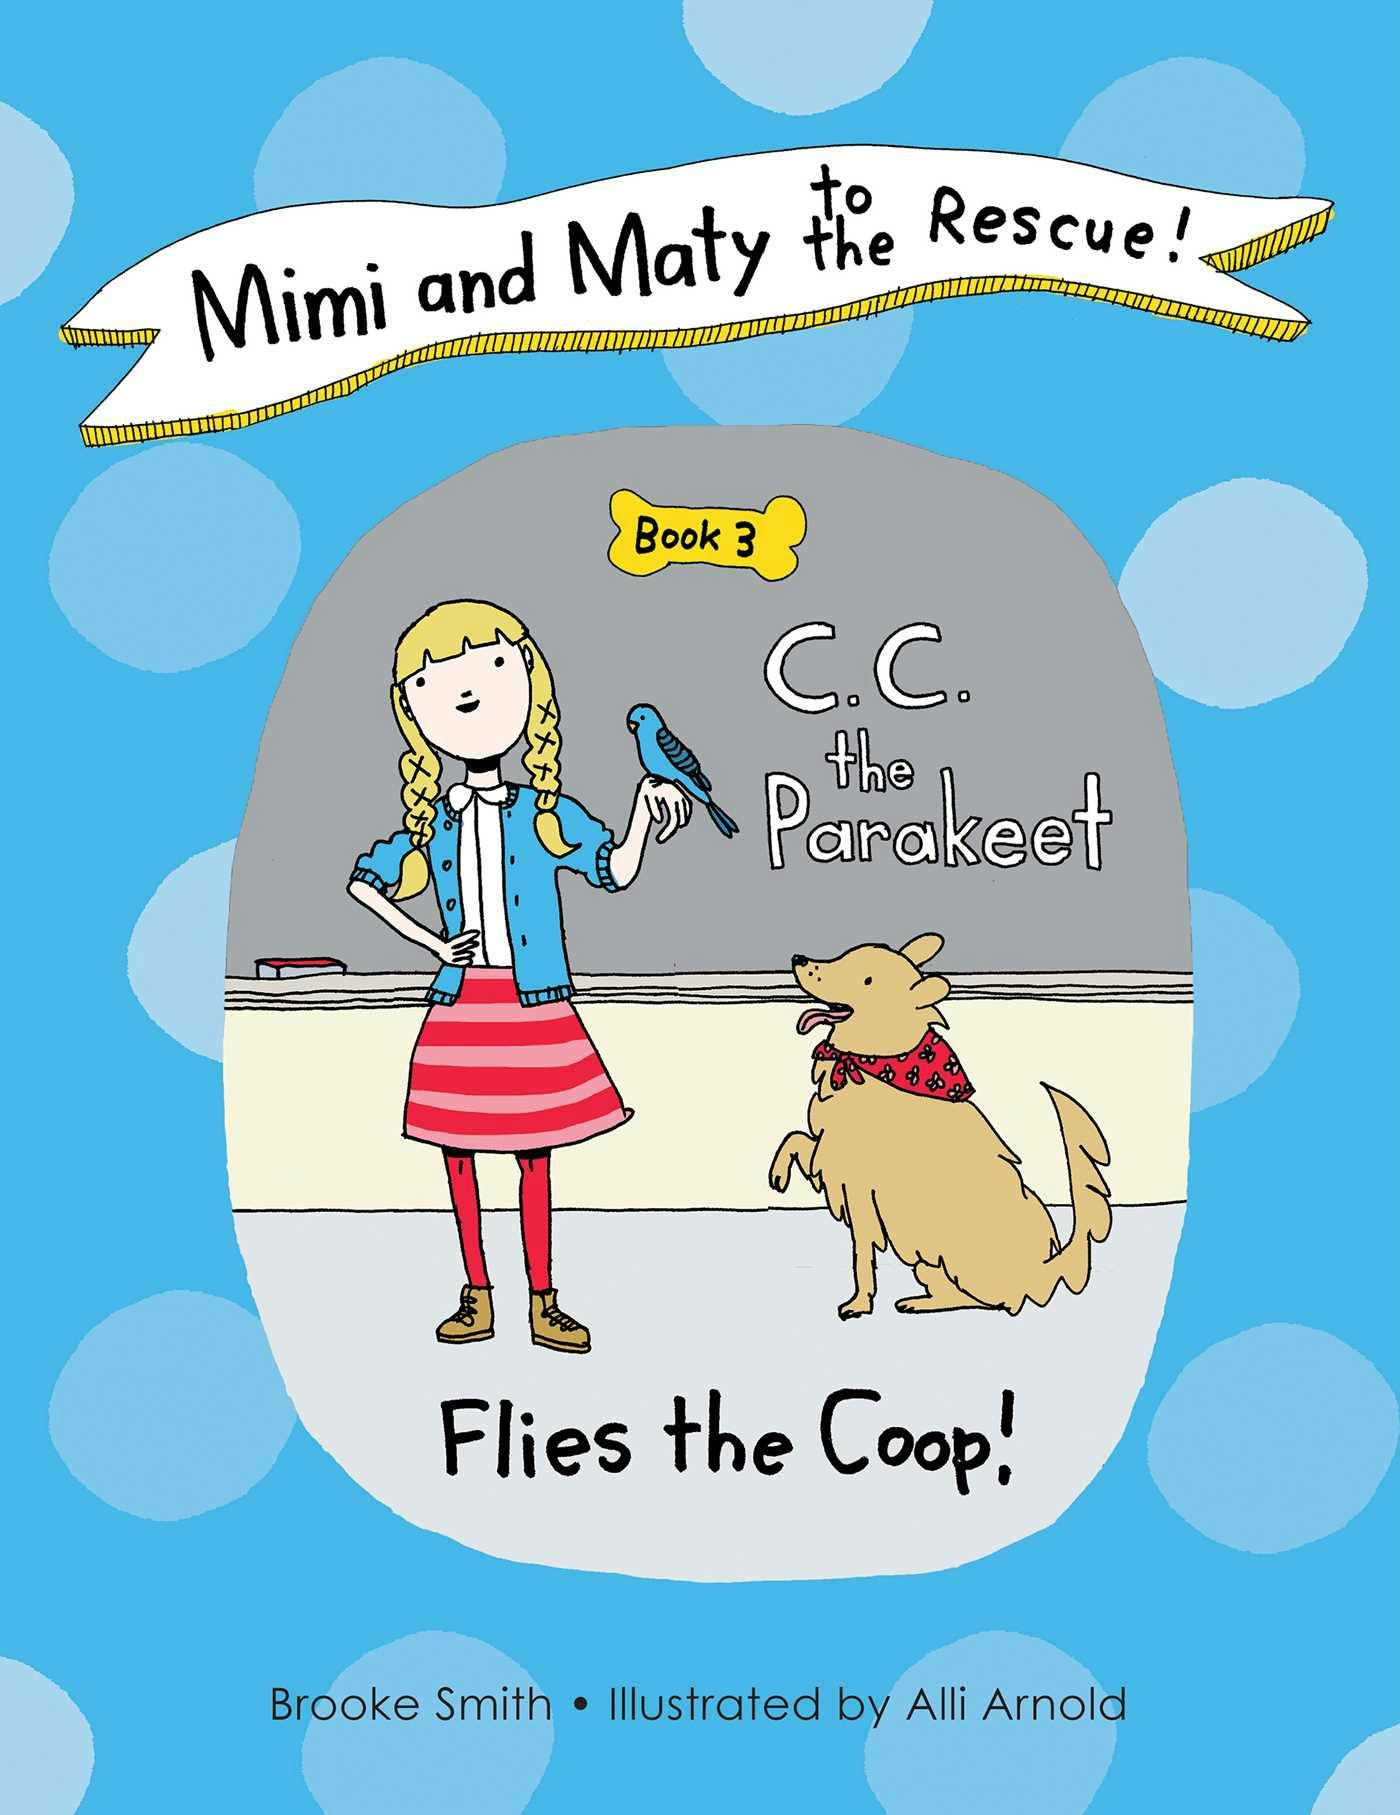 Mimi and Maty to the Rescue!: Book 3: C. C. the Parakeet Flies the Coop! - Brooke Smith